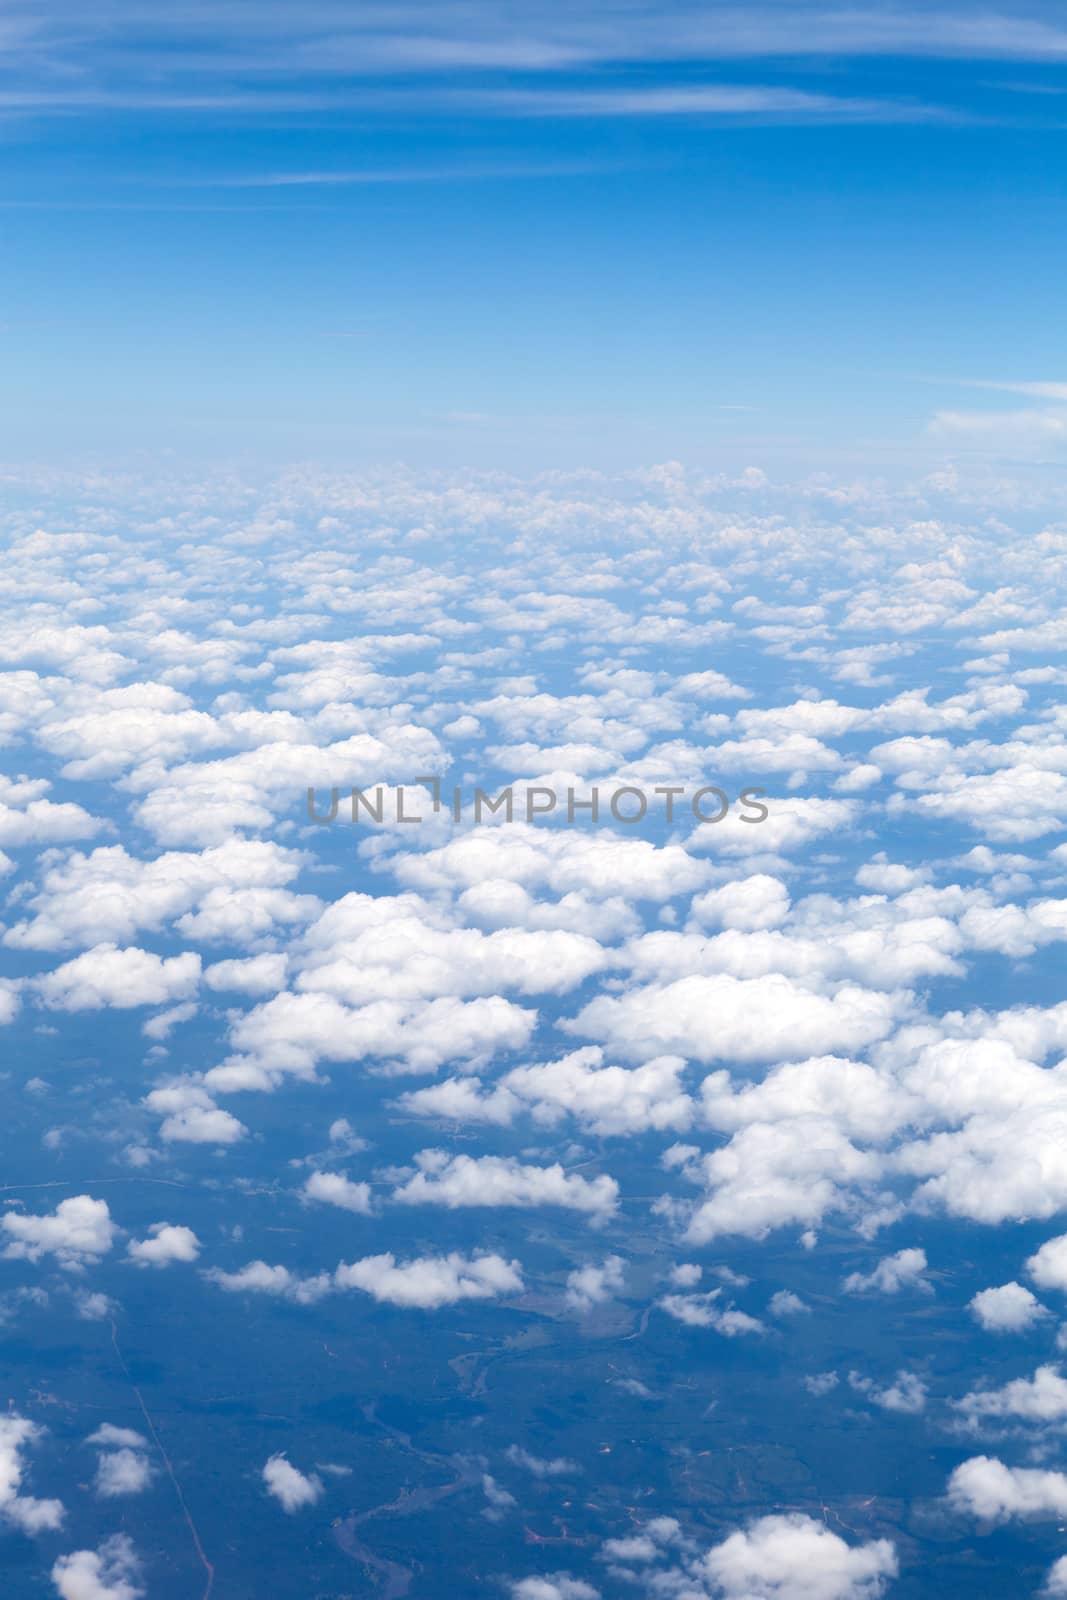 Aerial view of the blue skies and horizon with fluffy clouds and the earth below.